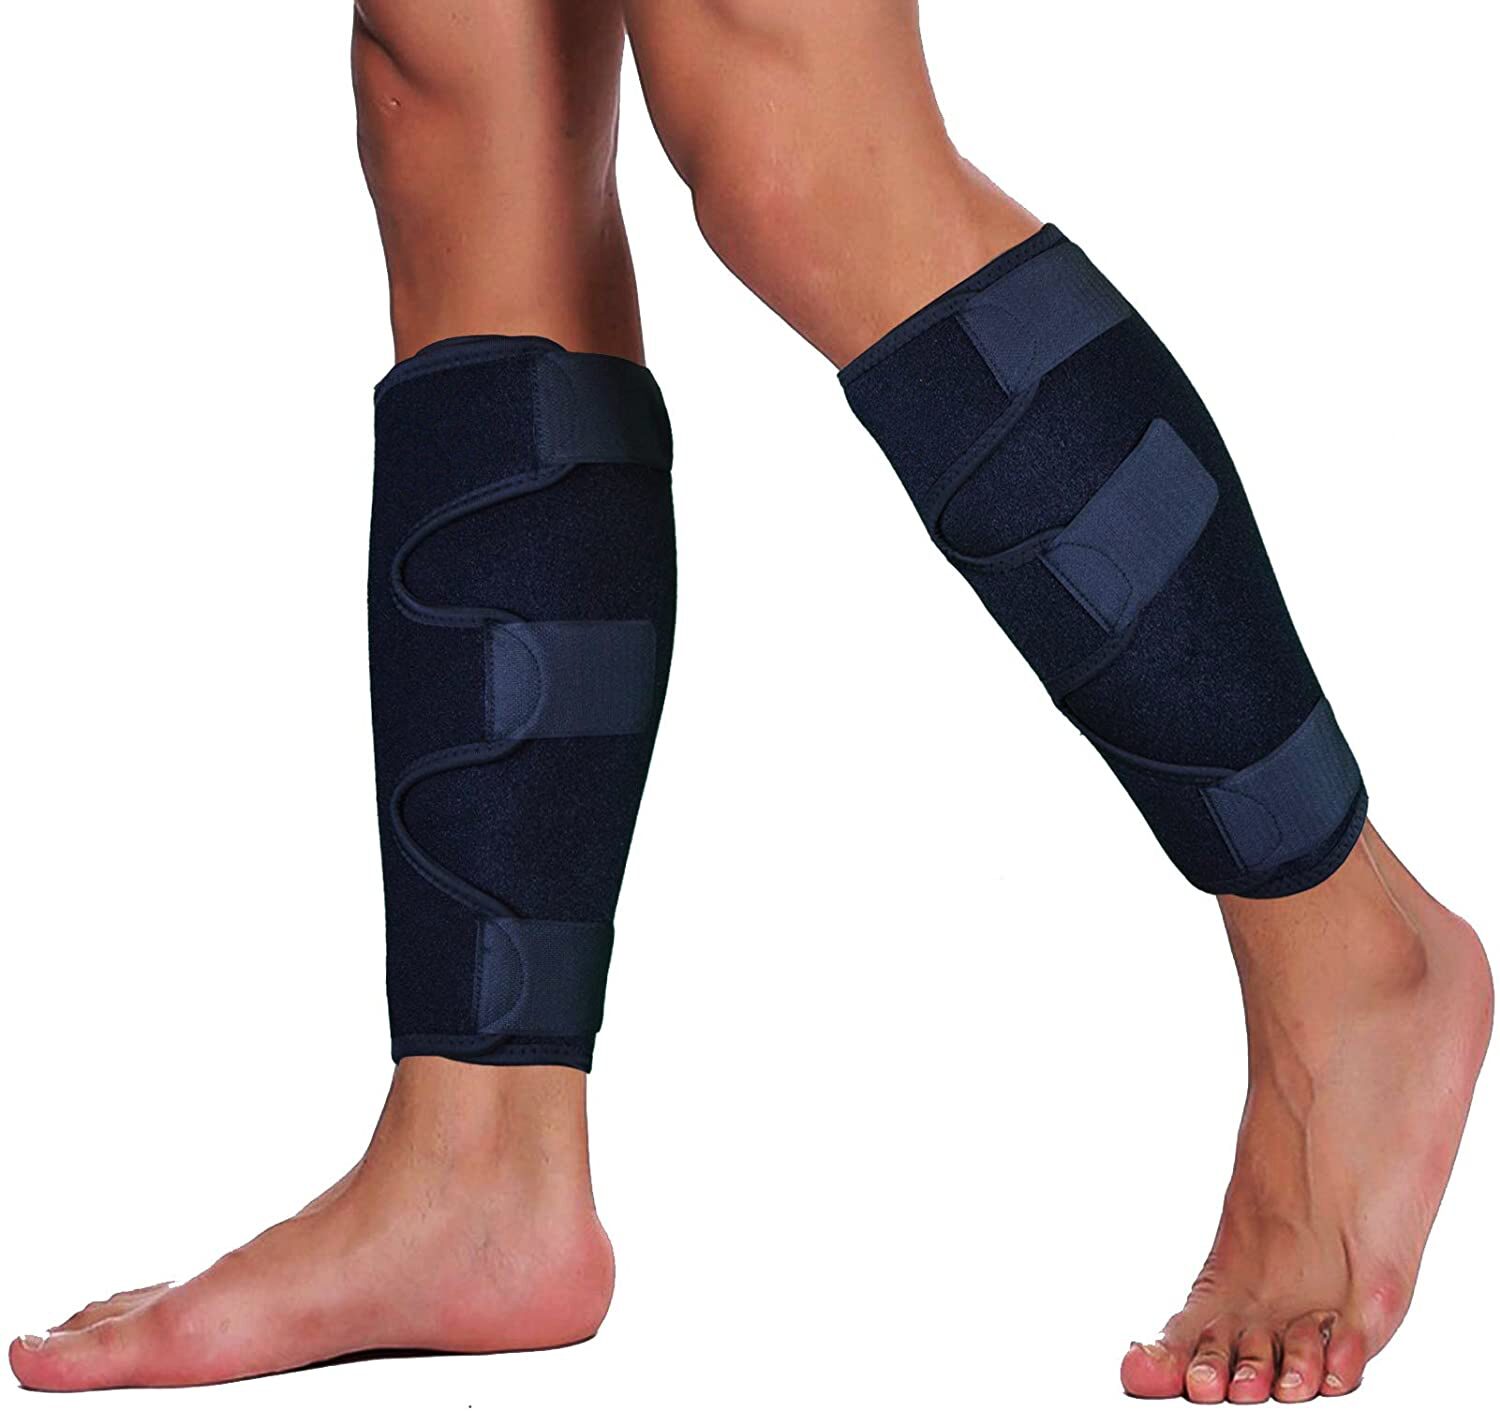 https://nuovahealth.co.uk/wp-content/uploads/2022/05/calf-compression-sleeves.jpg